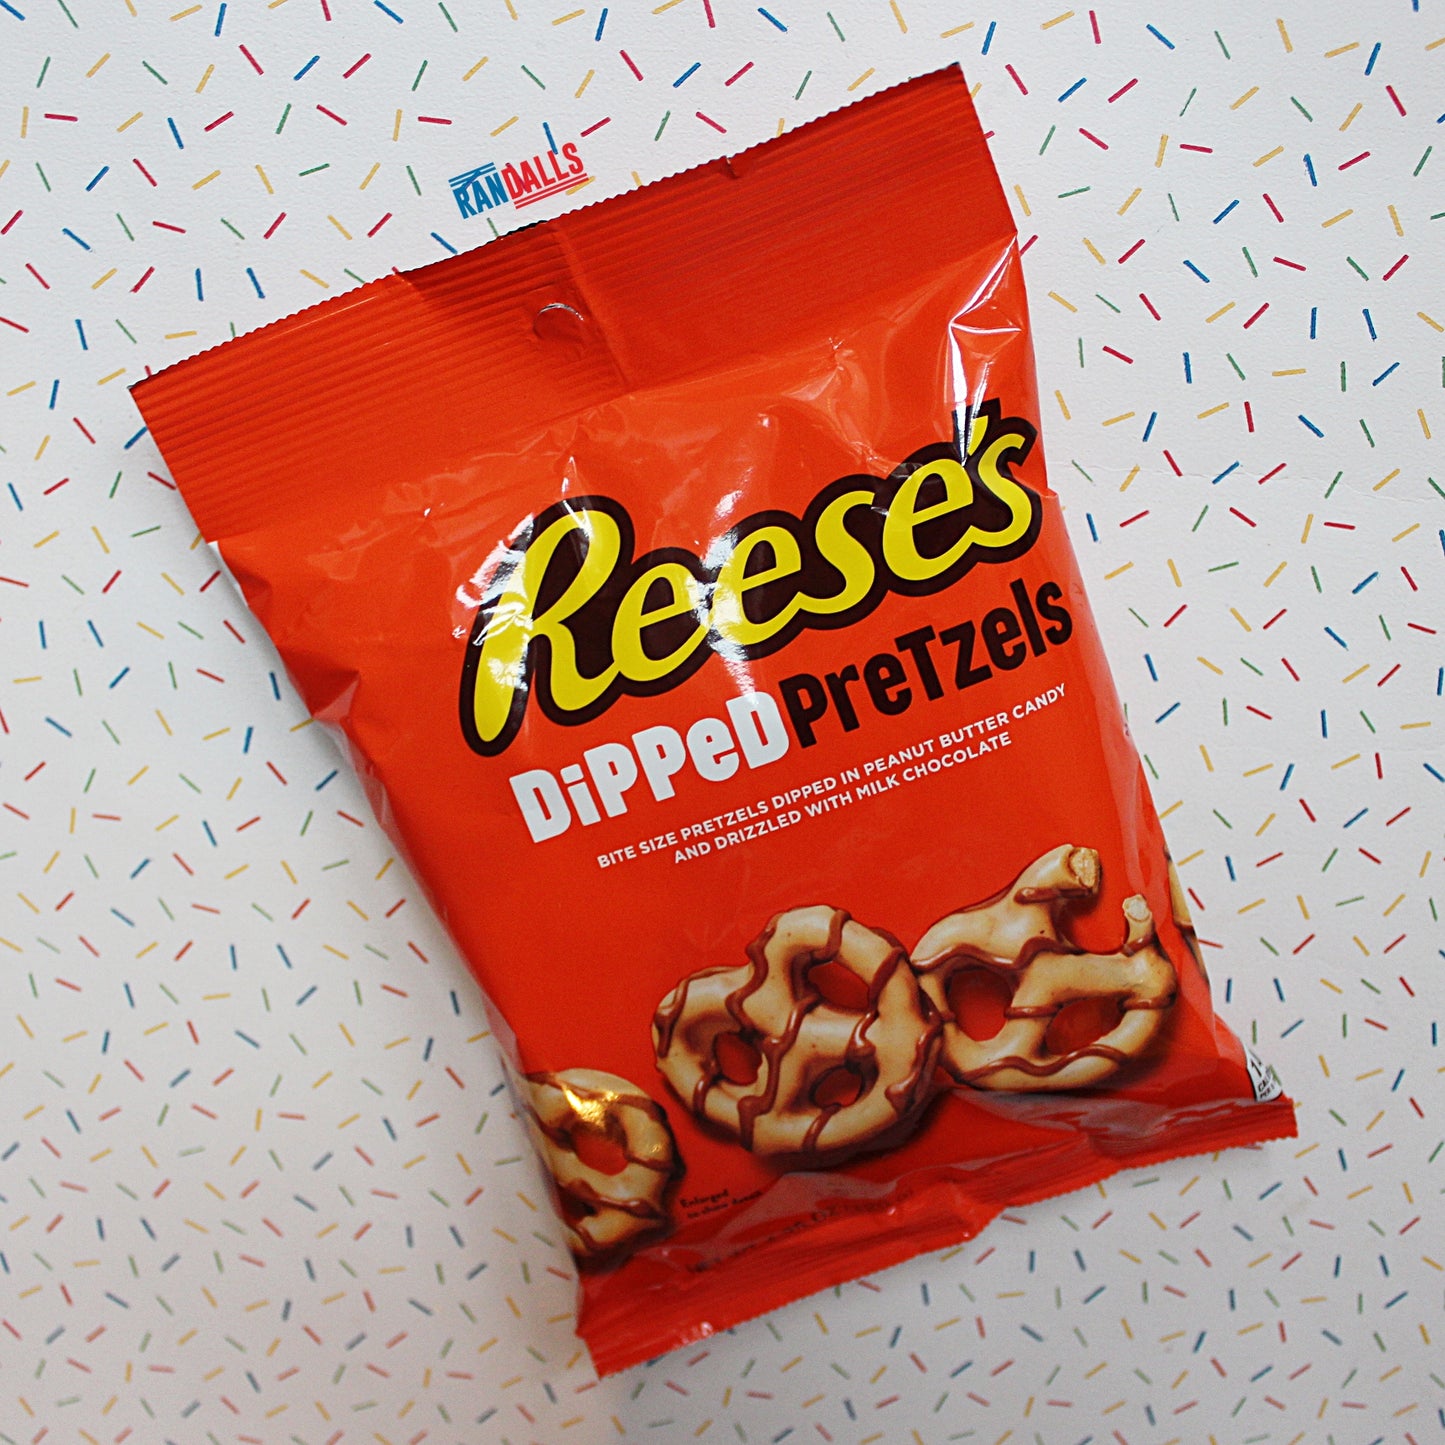 reese's dipped pretzels, chocolate, peanut butter, candy, drizzled, randalls